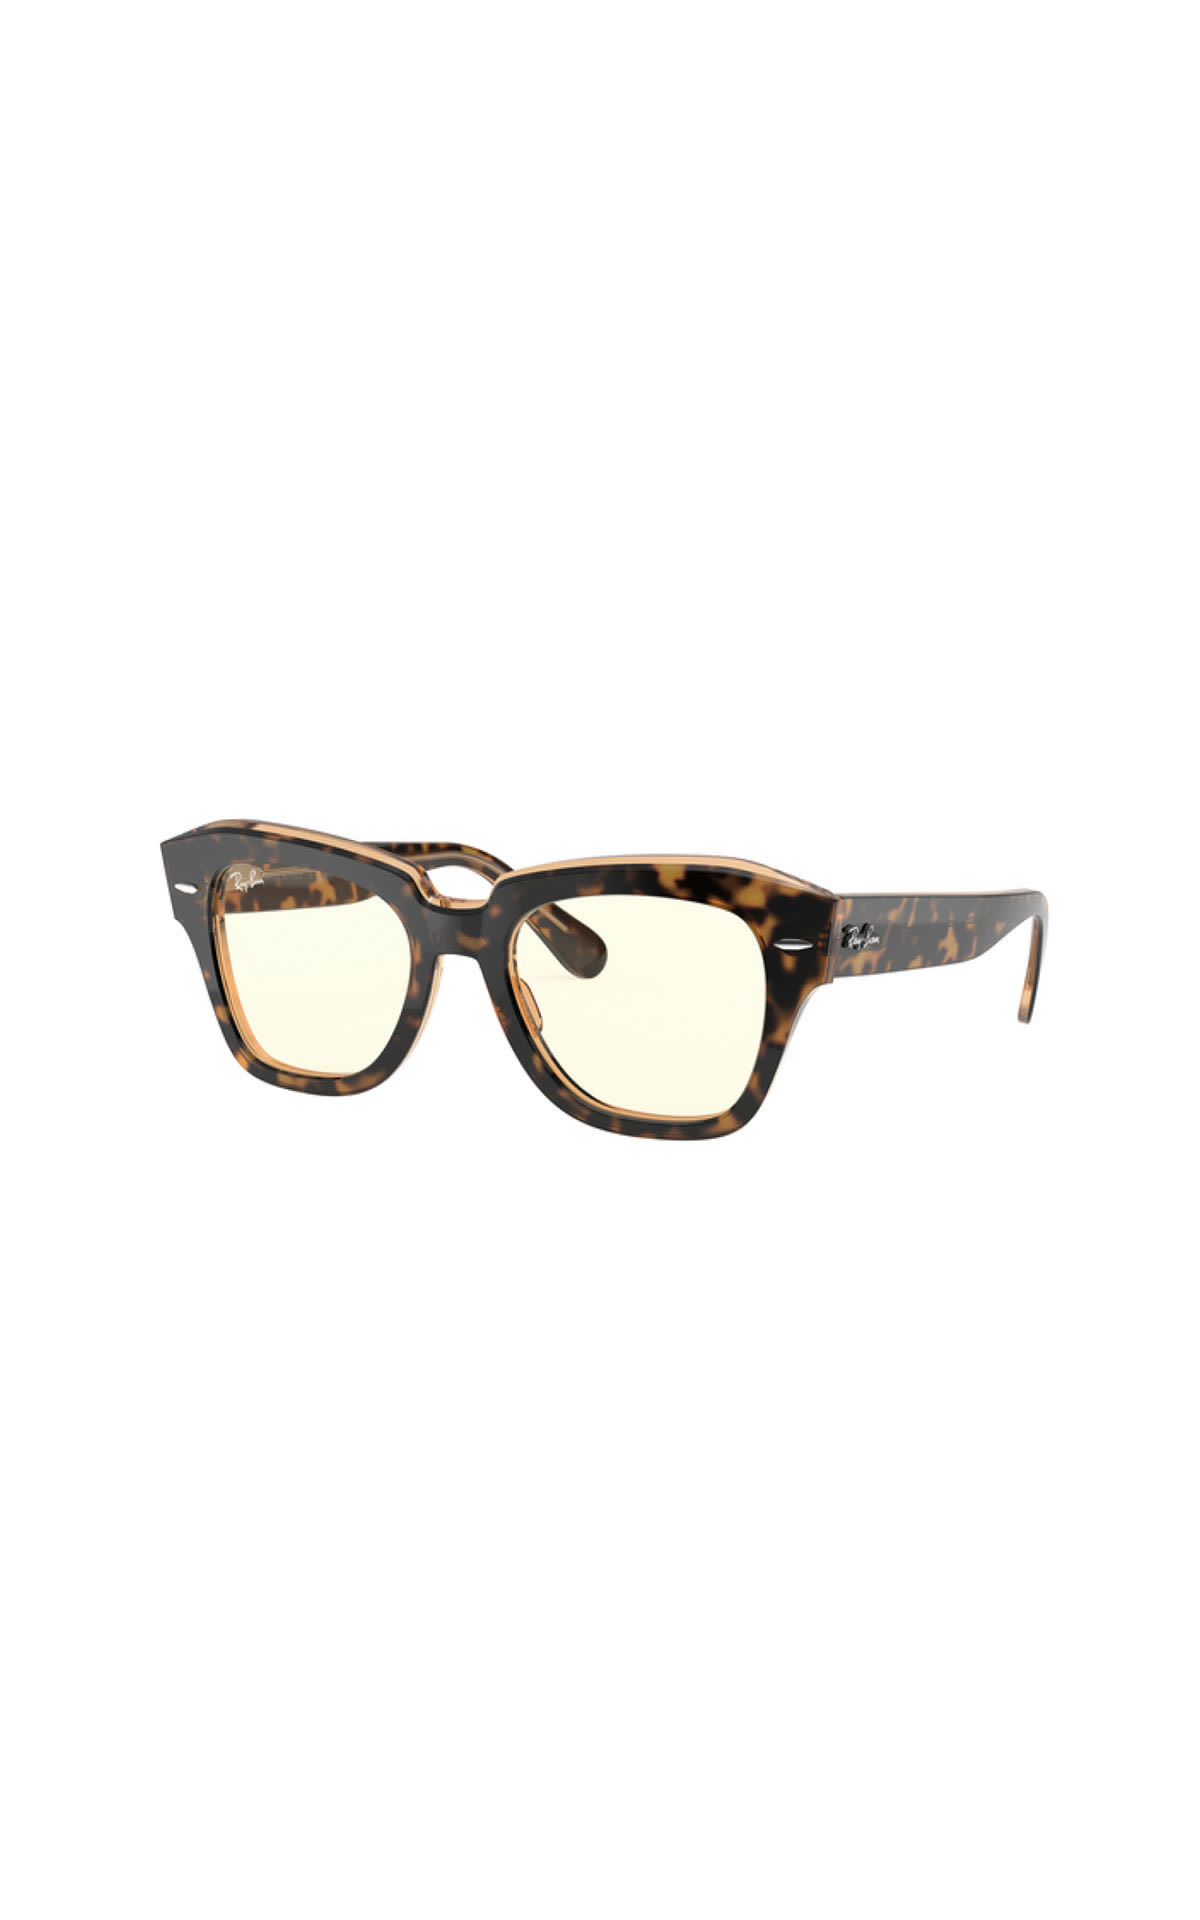 David Clulow Ray-Ban RB2186 49 state street from Bicester Village